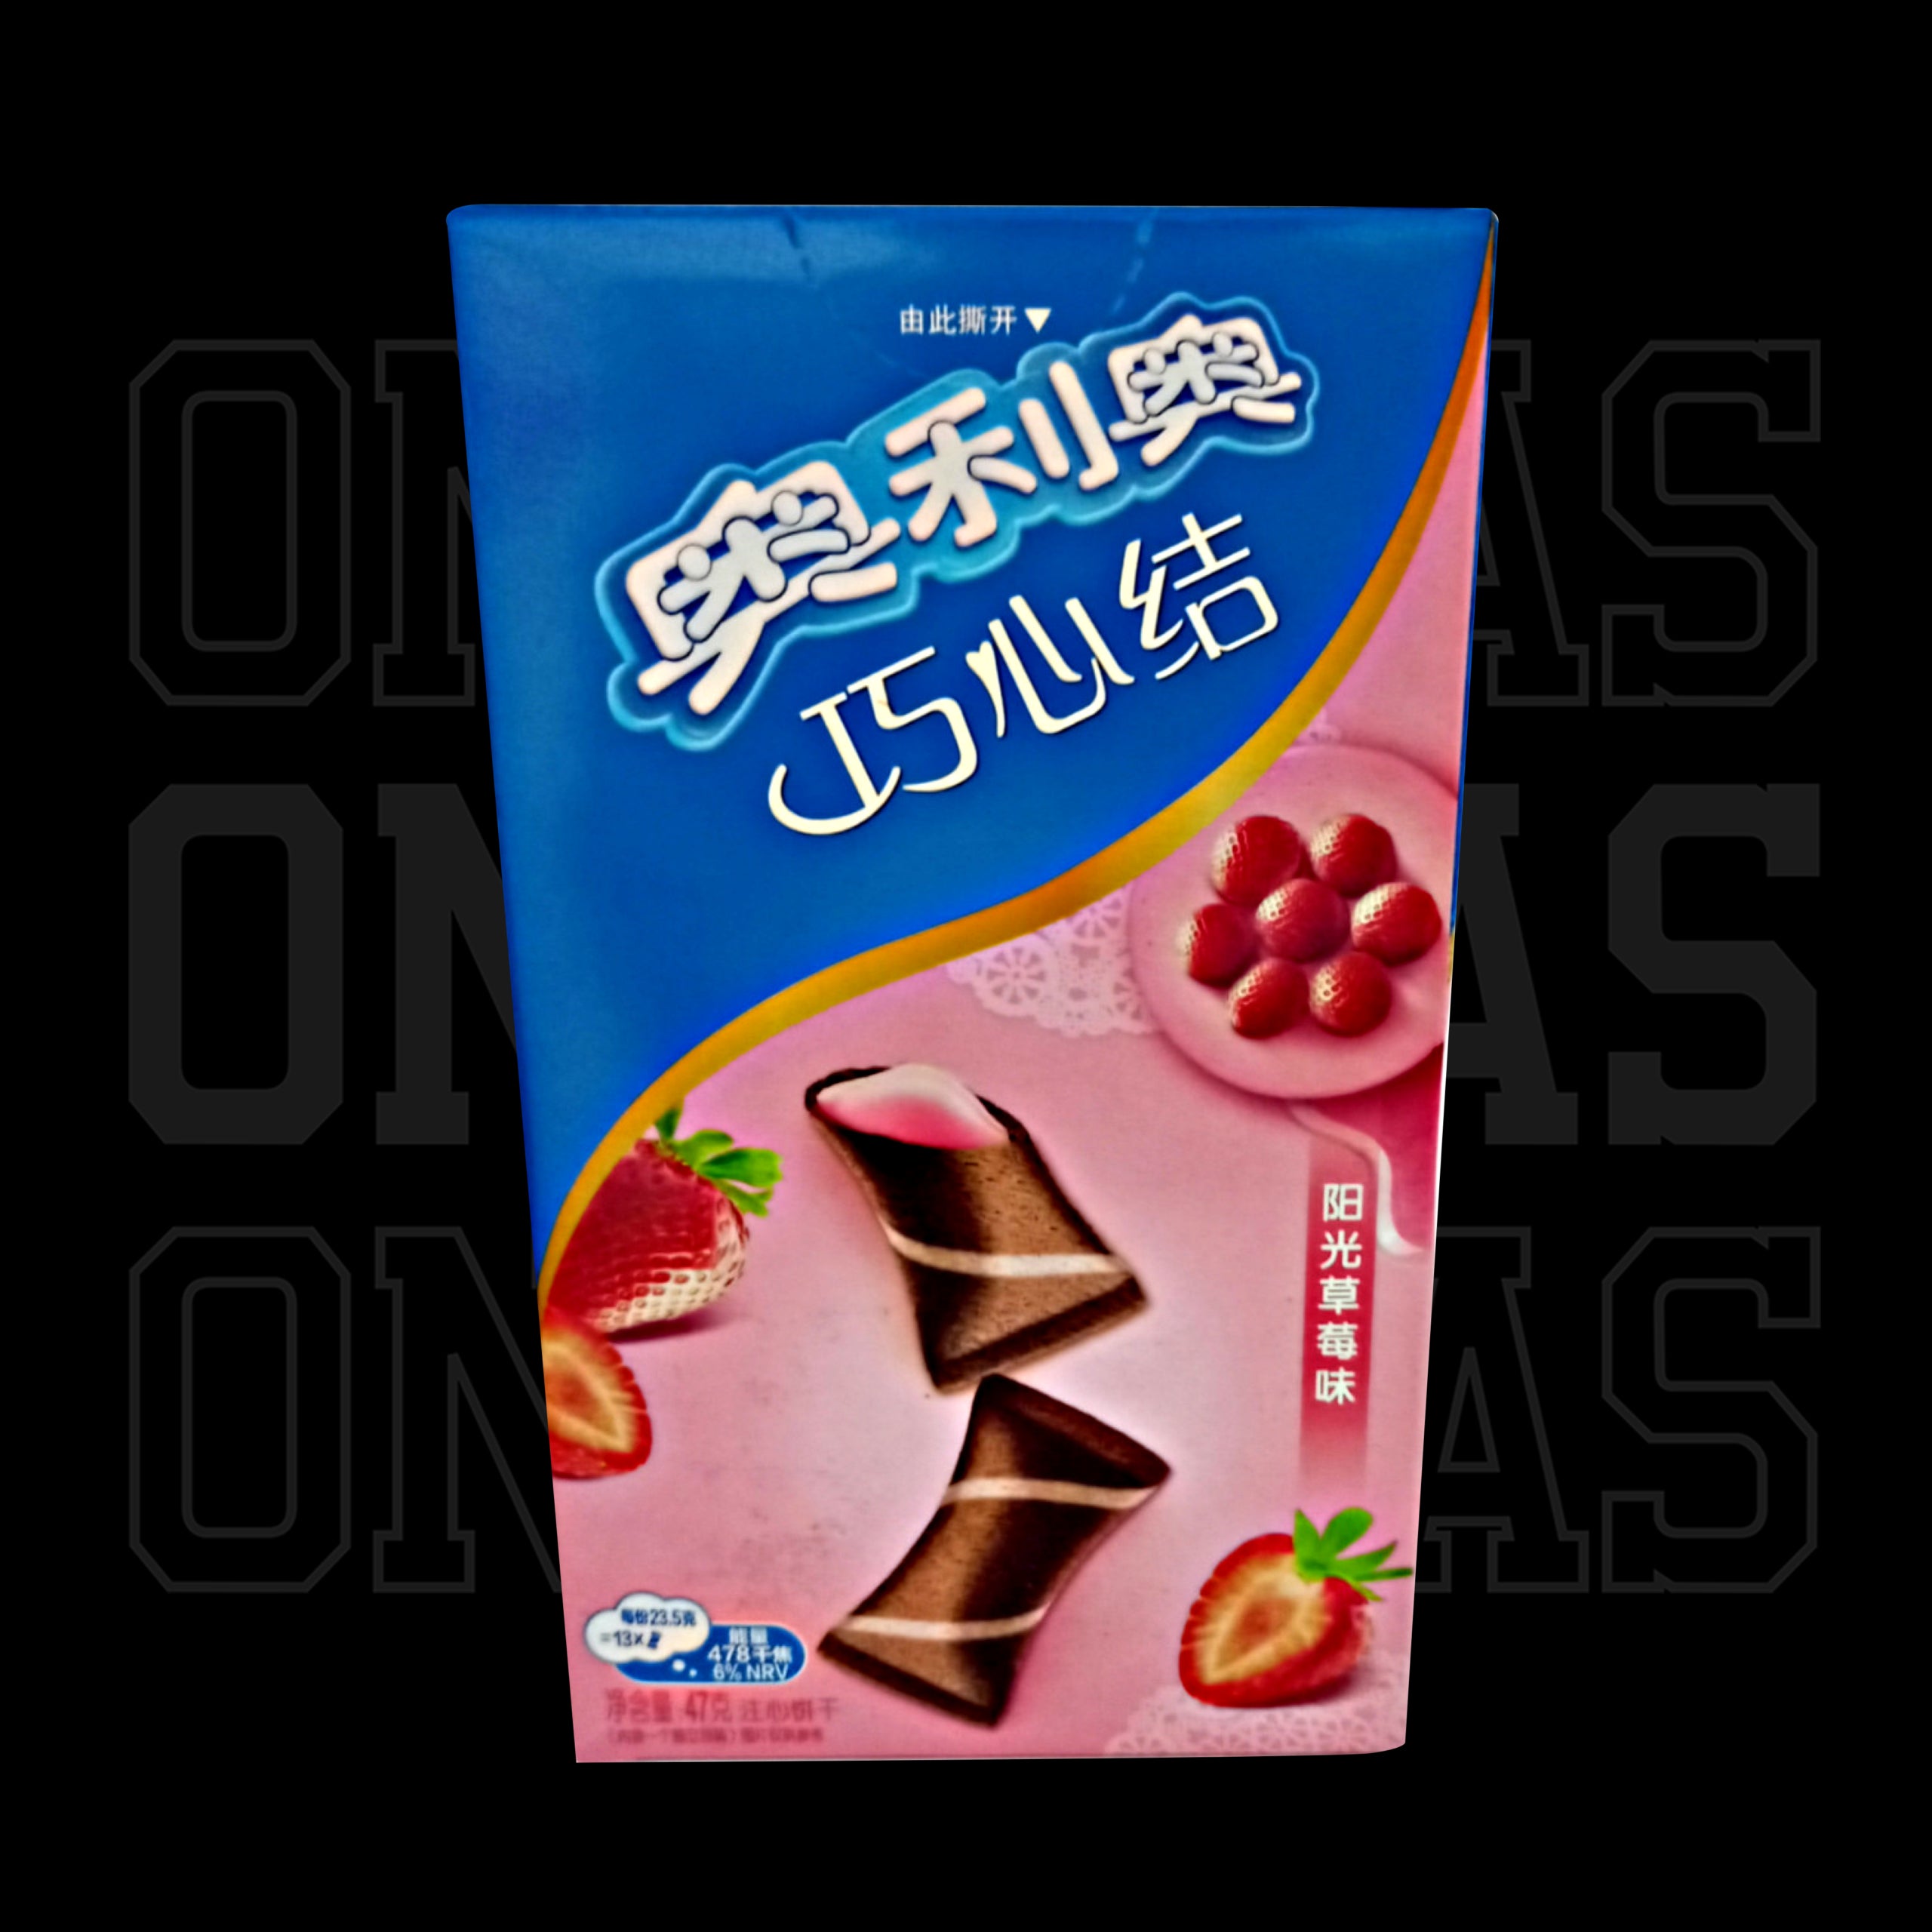 Oreo Hearted Biscuits Strawberry Flavor